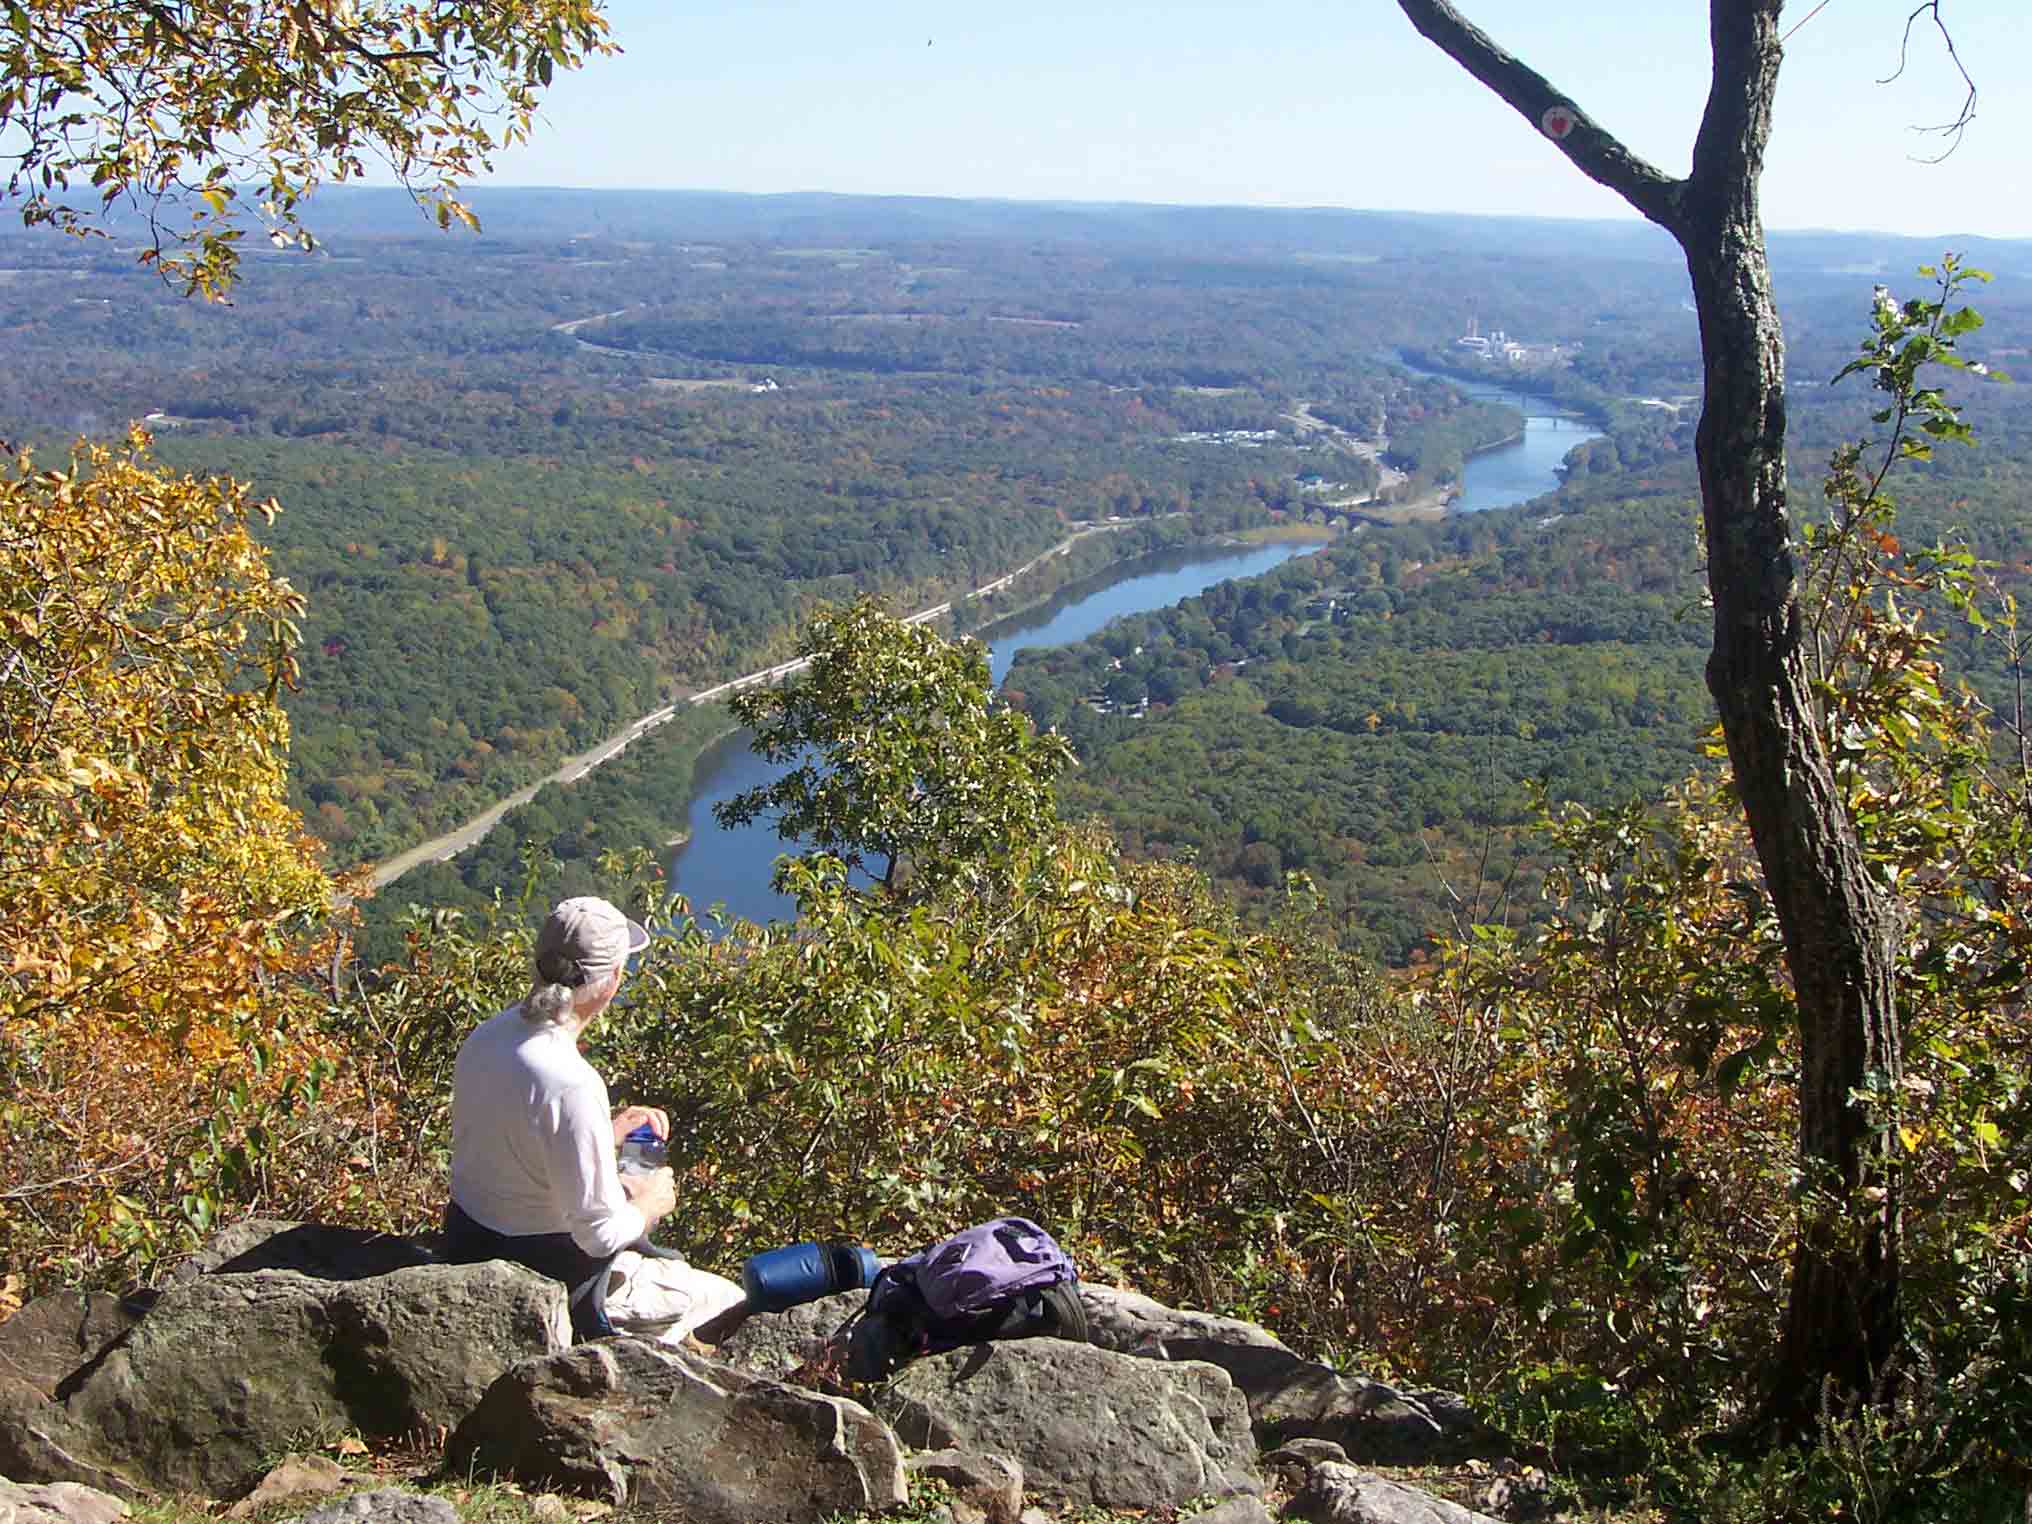 mm 2.8 - Barry admires view of Delaware River from viewpoint about 0.1 miles south of Mt. Minsi summit.  New Jersey is on the left side, Pennsylvania on the right.  Courtesy dlcul@conncoll.edu